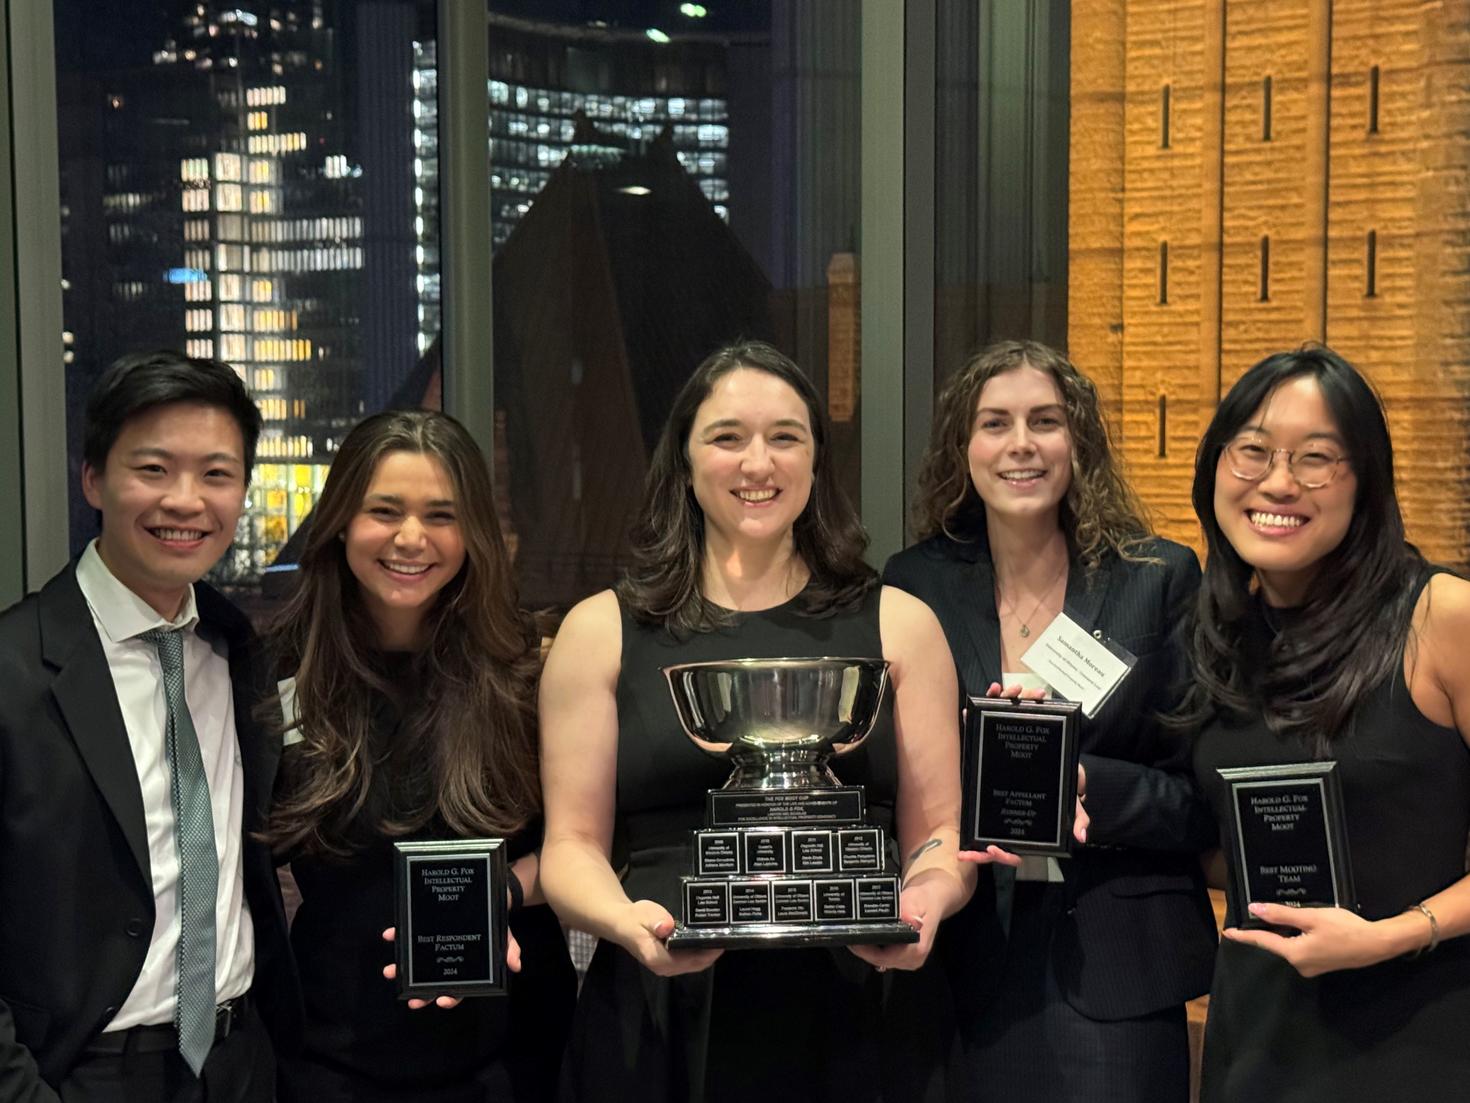 This year’s uOttawa Fox team comprised captain Melissa Dupuis-Crane, Samantha Moreau and Emily Chu for the appellant, and Ronald Cheung and Madison Venugopal for the respondent